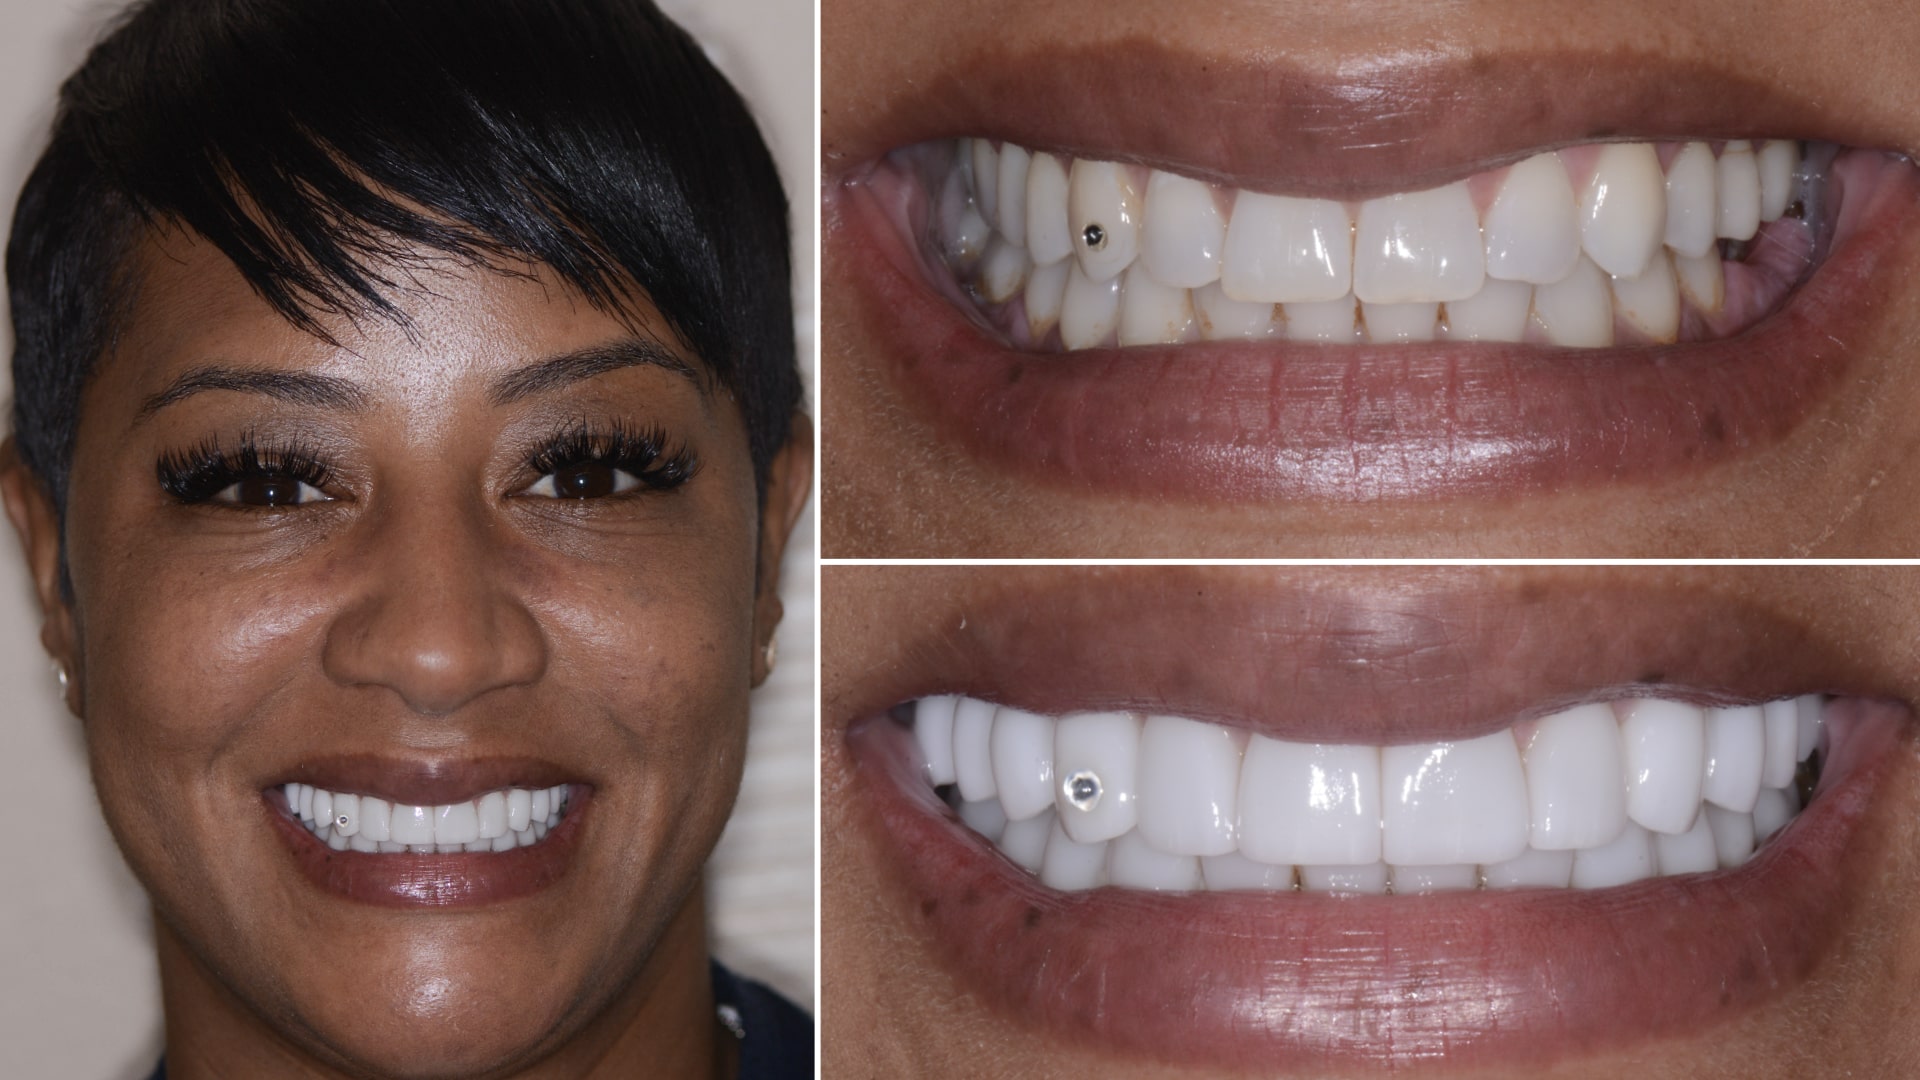 Woman's smile before and after teeth whitening